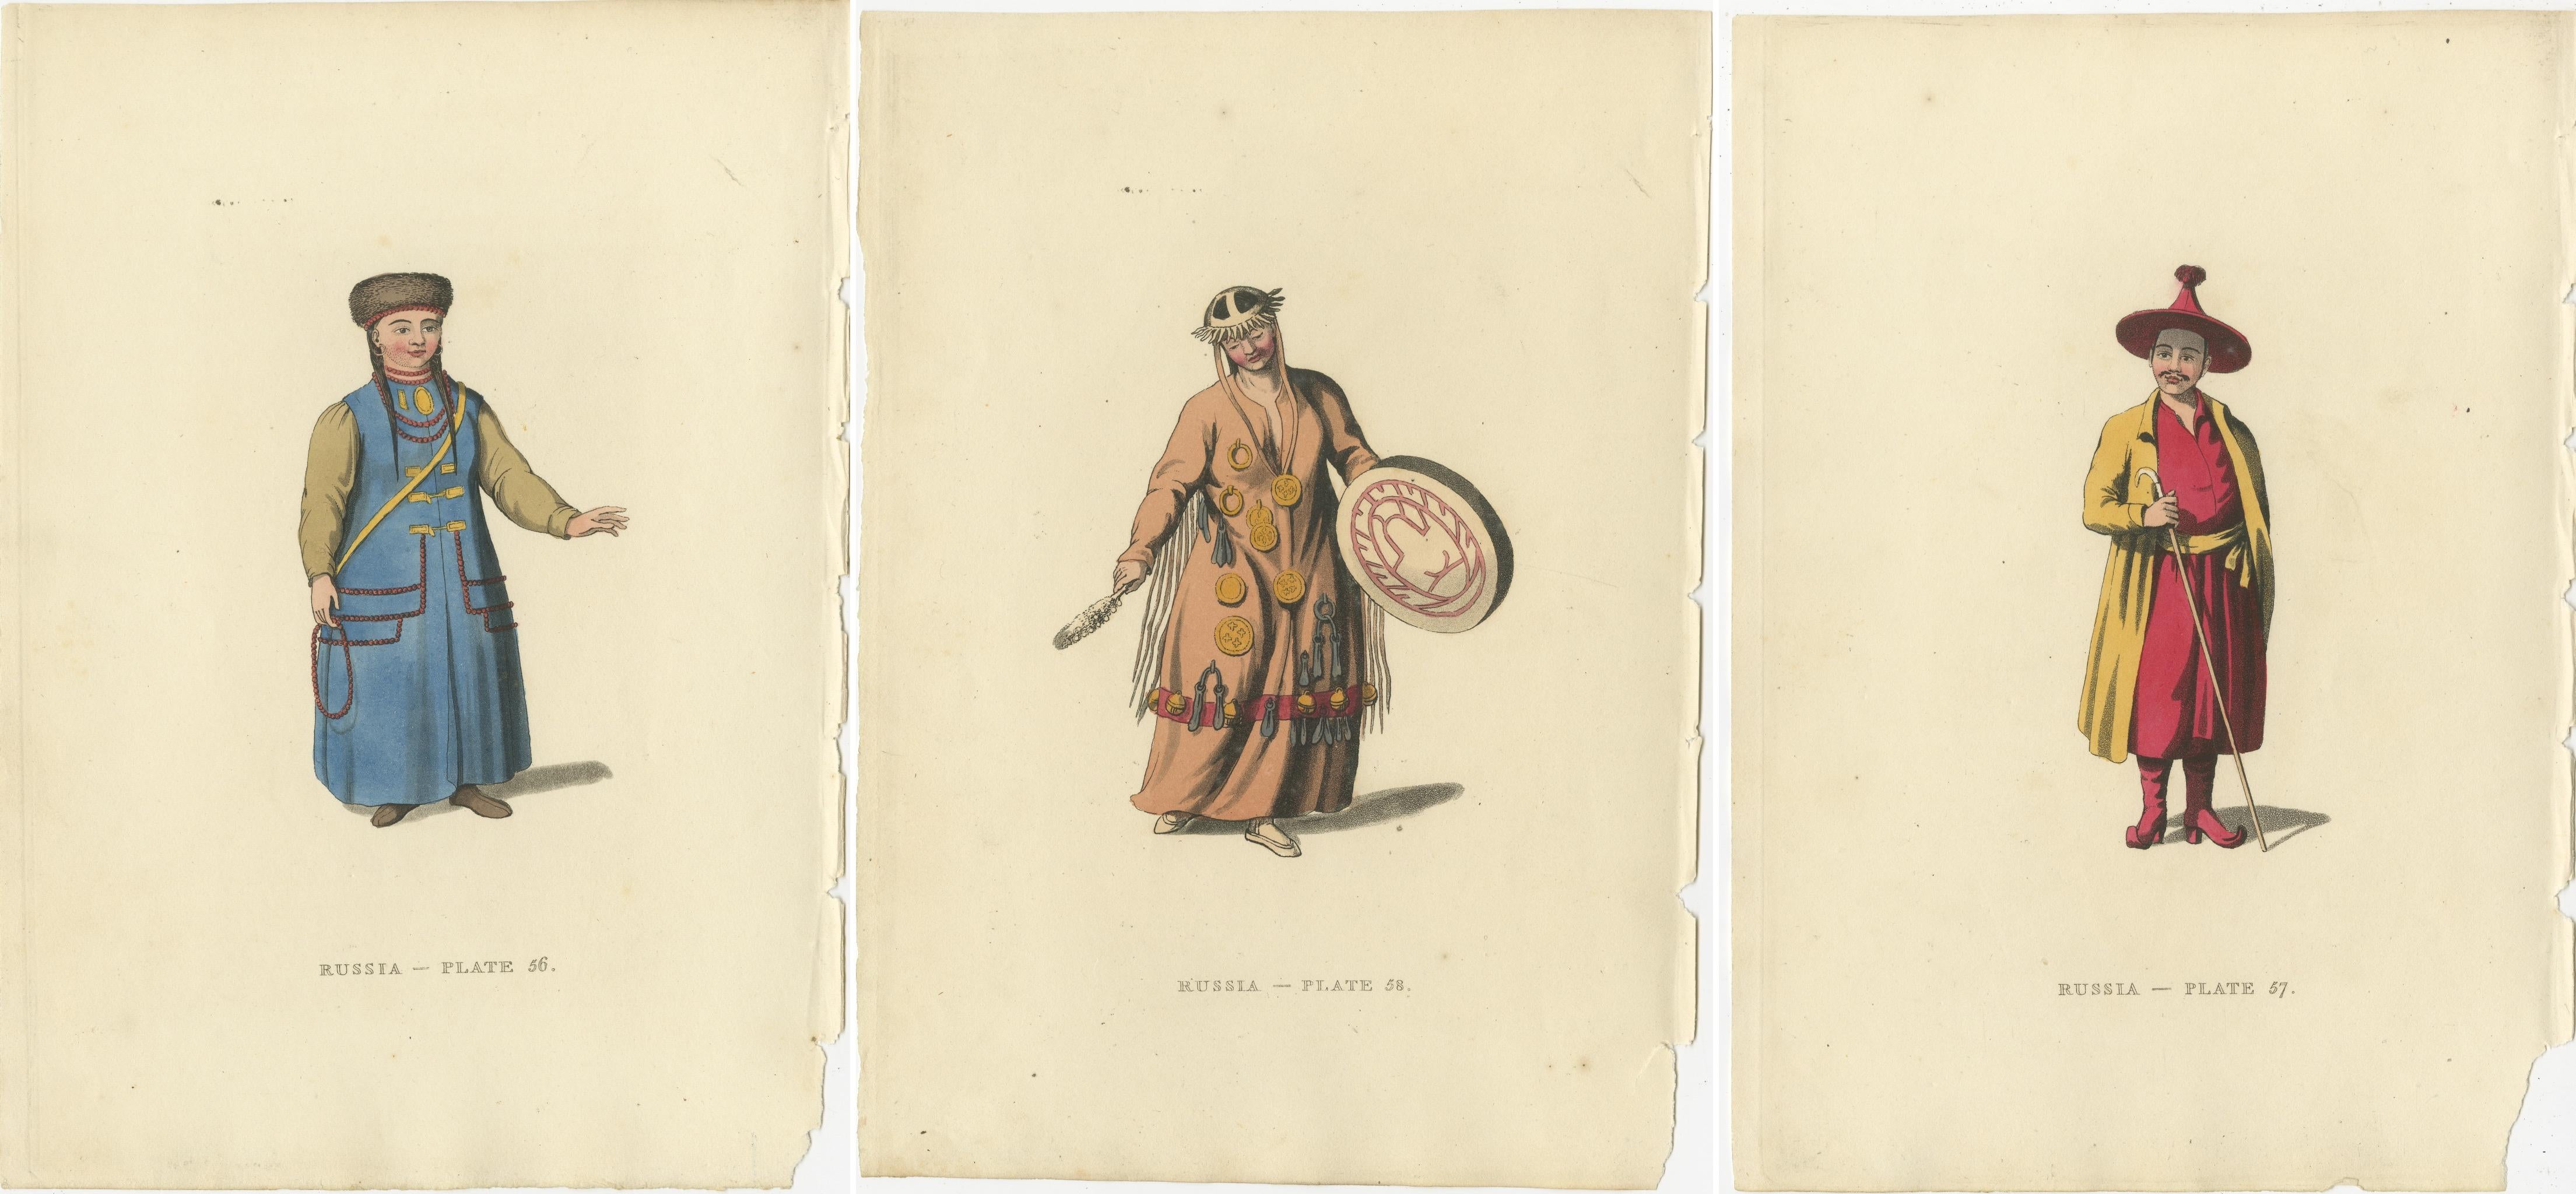 The images are original hand-colored engravings from William Alexander's 